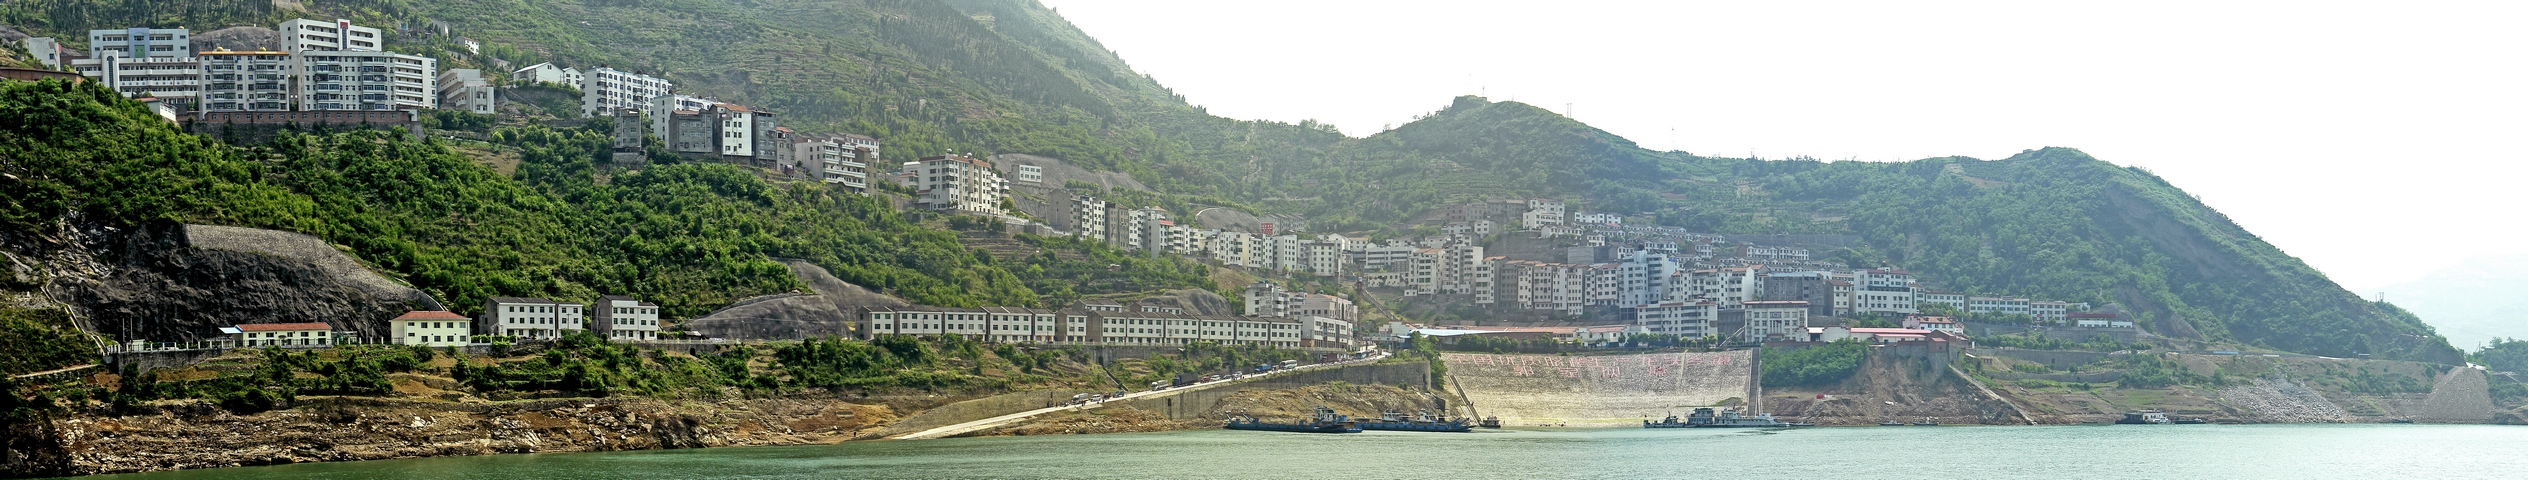 3Gorges32.jpg - 4 images, Size: 10949 x 2186, FOV: 83.35 x 16.05, RMS: 3.36, Lens: Standard, Projection: Cylindrical, Color: LDR